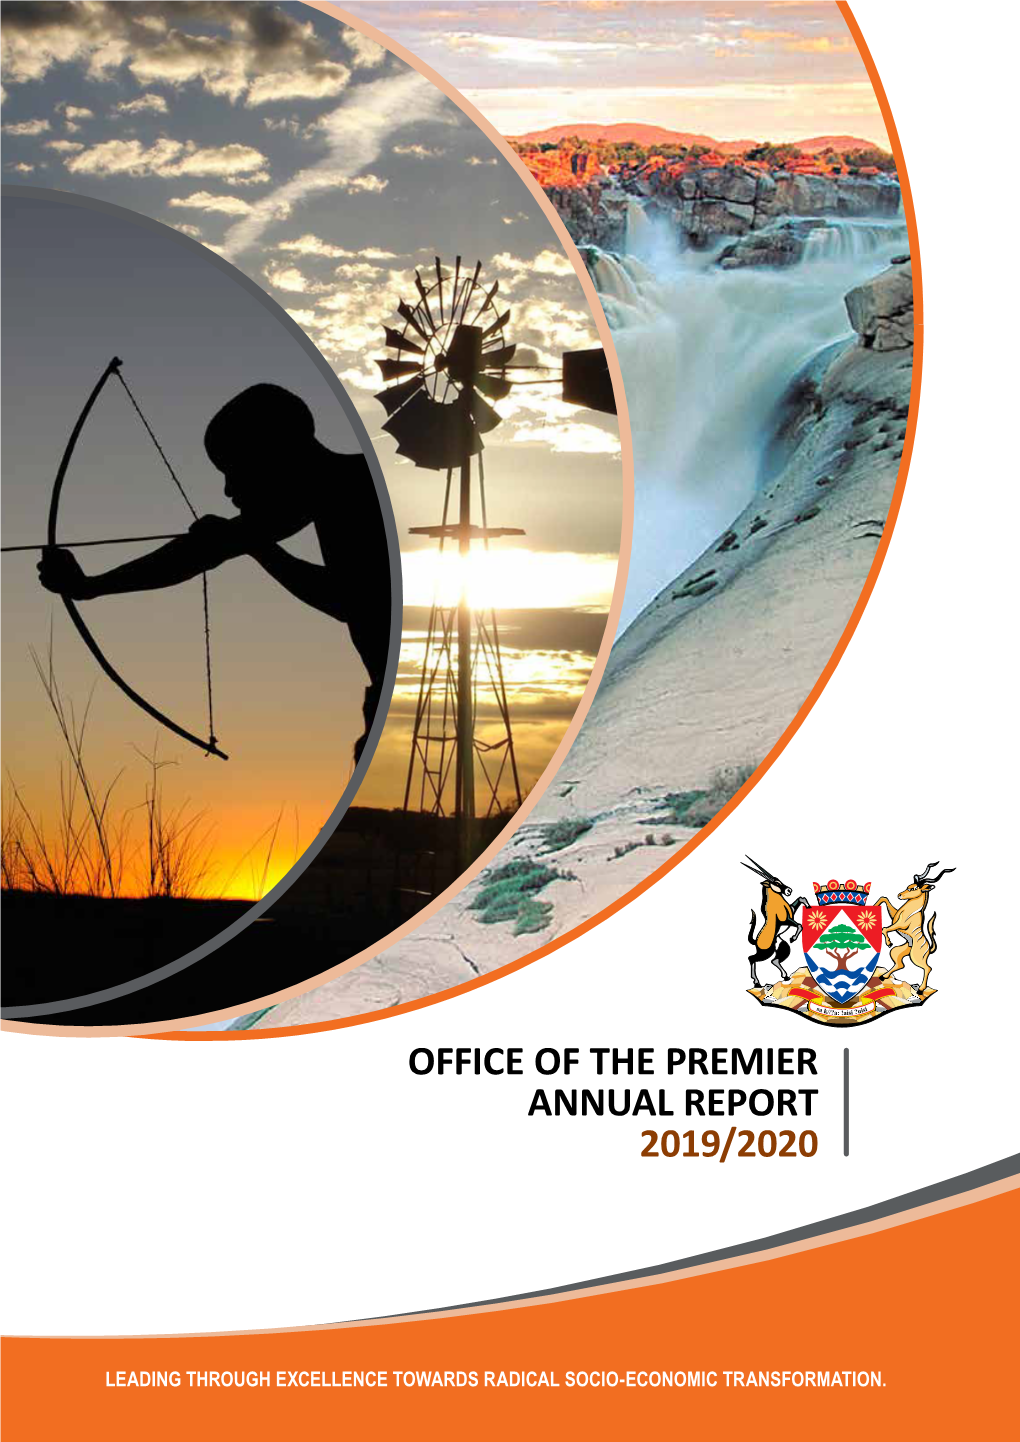 Annual Report Office of the Premier 2019/2020 Pr236/2020 Isbn: 978-0-621-48641-4